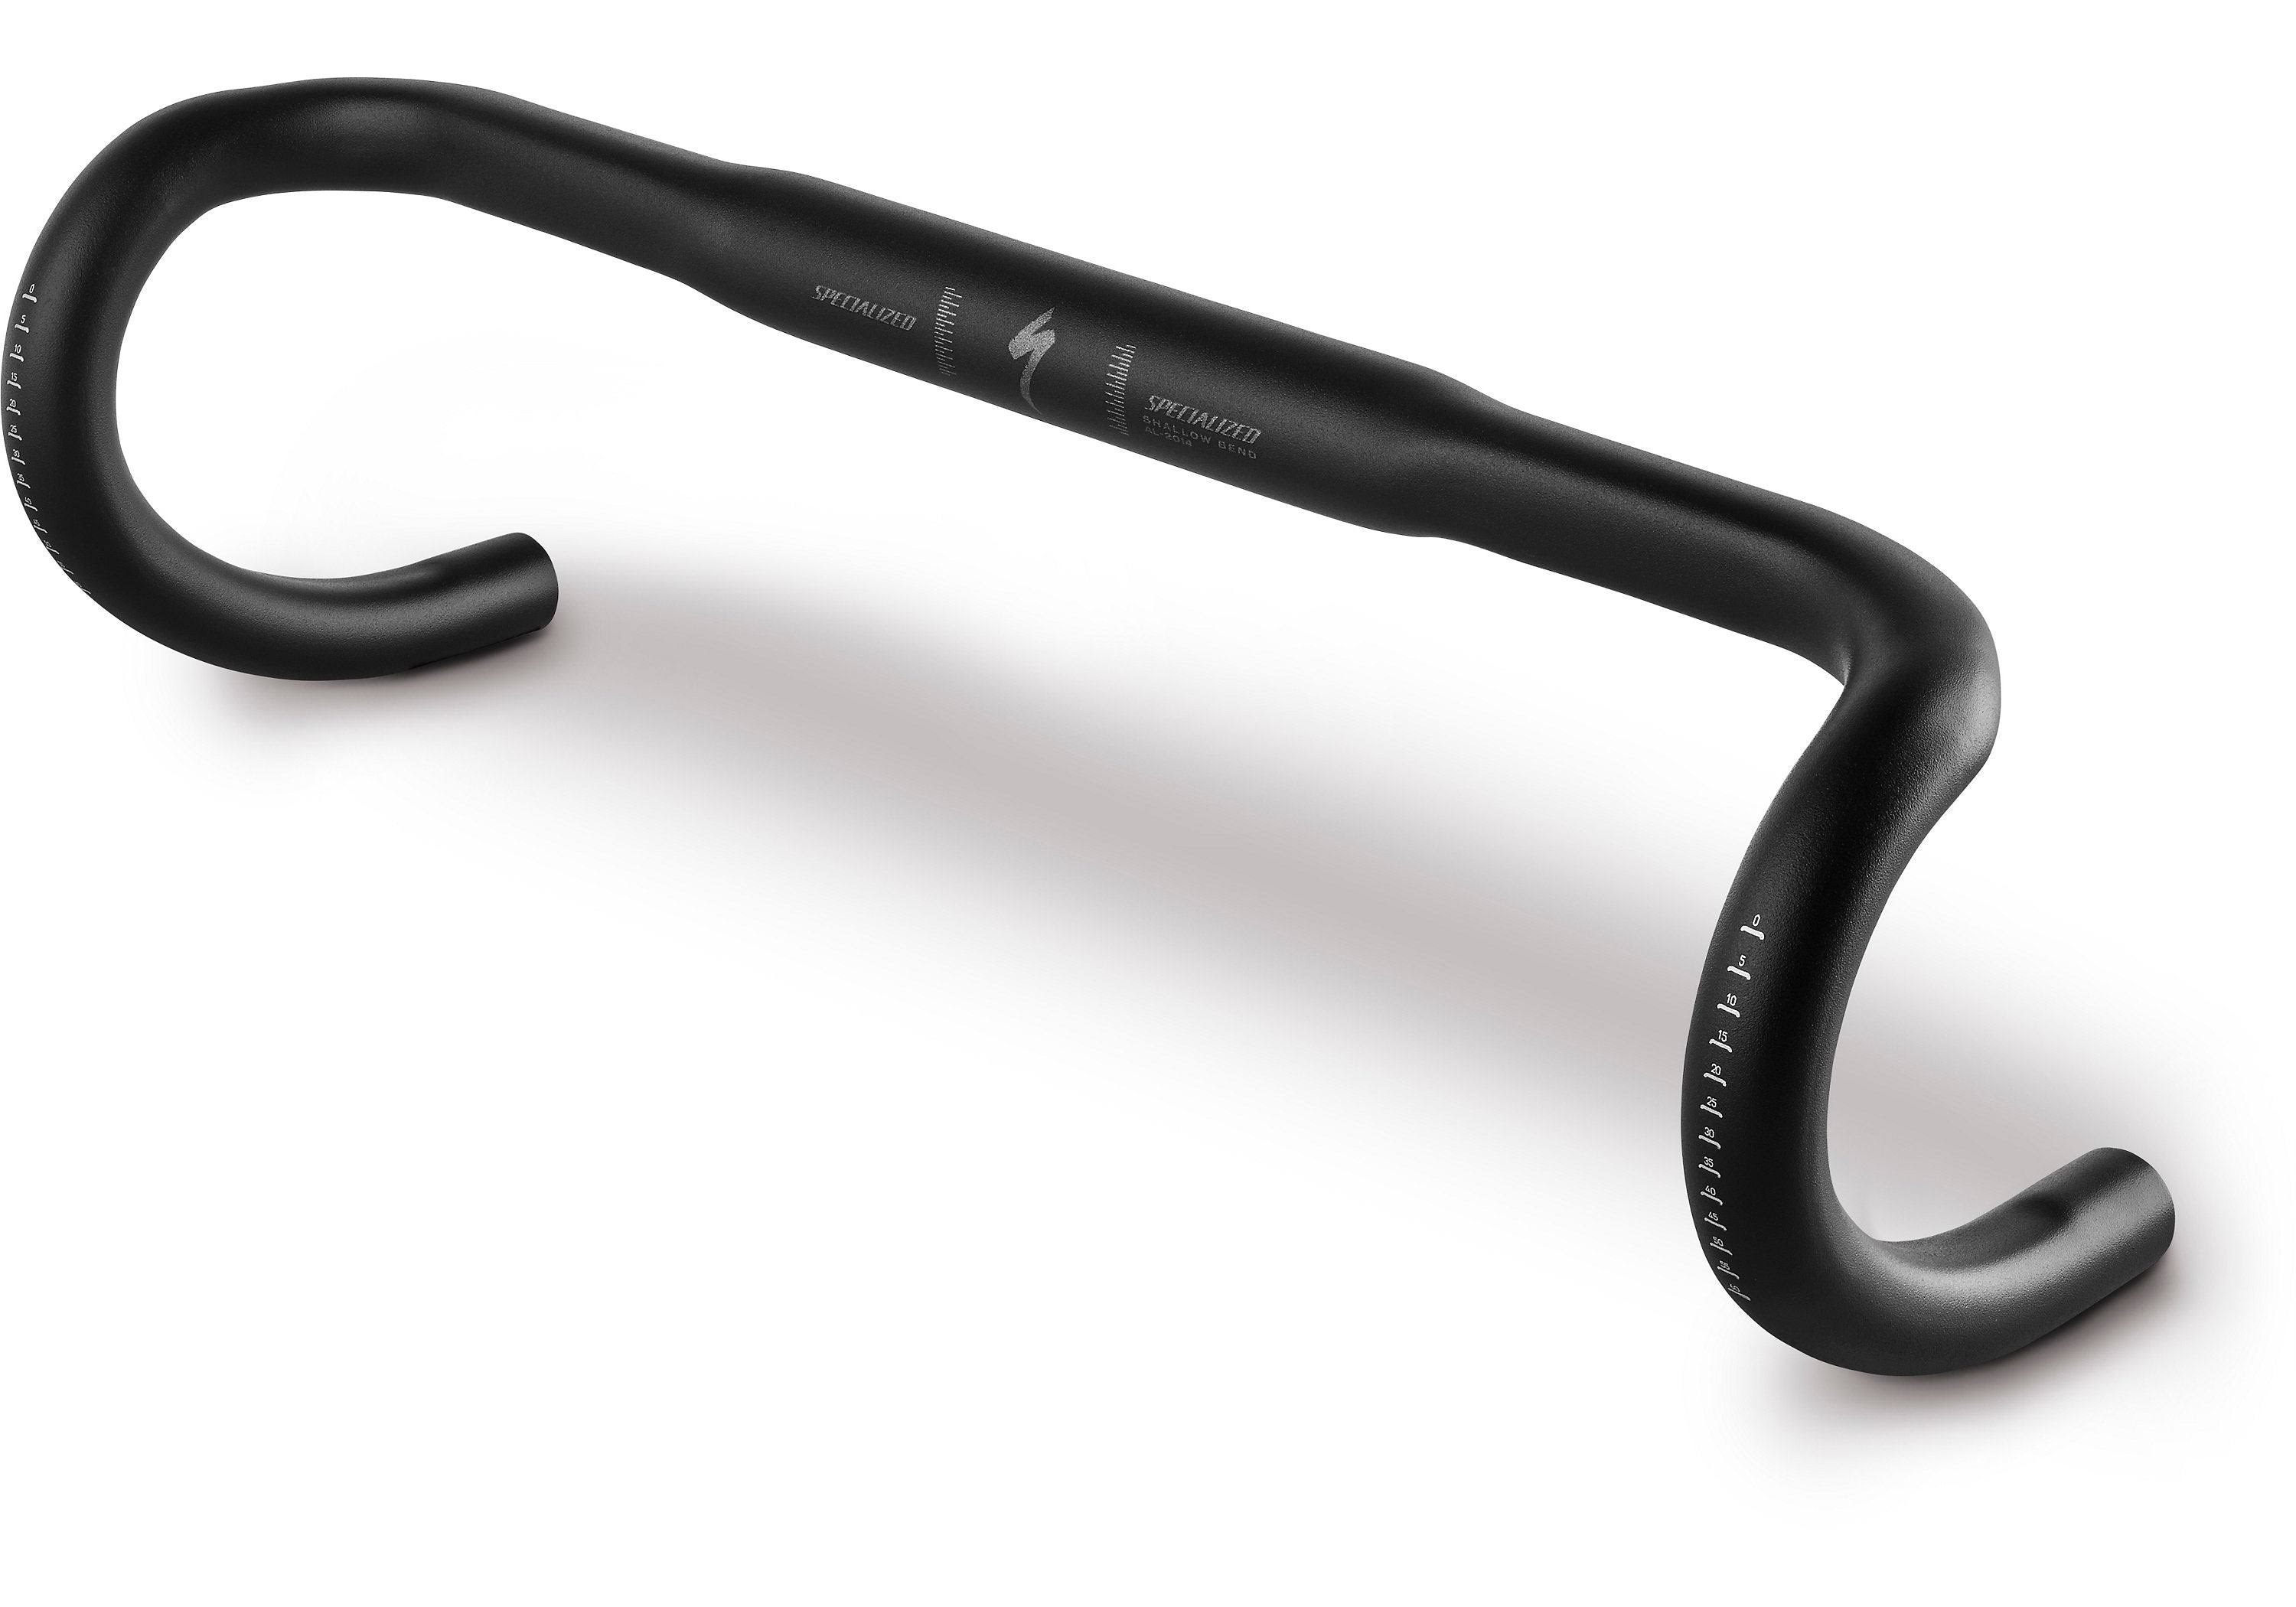 Specialized Expert Alloy Shallow Bend Handlebar - Black/Charcoal